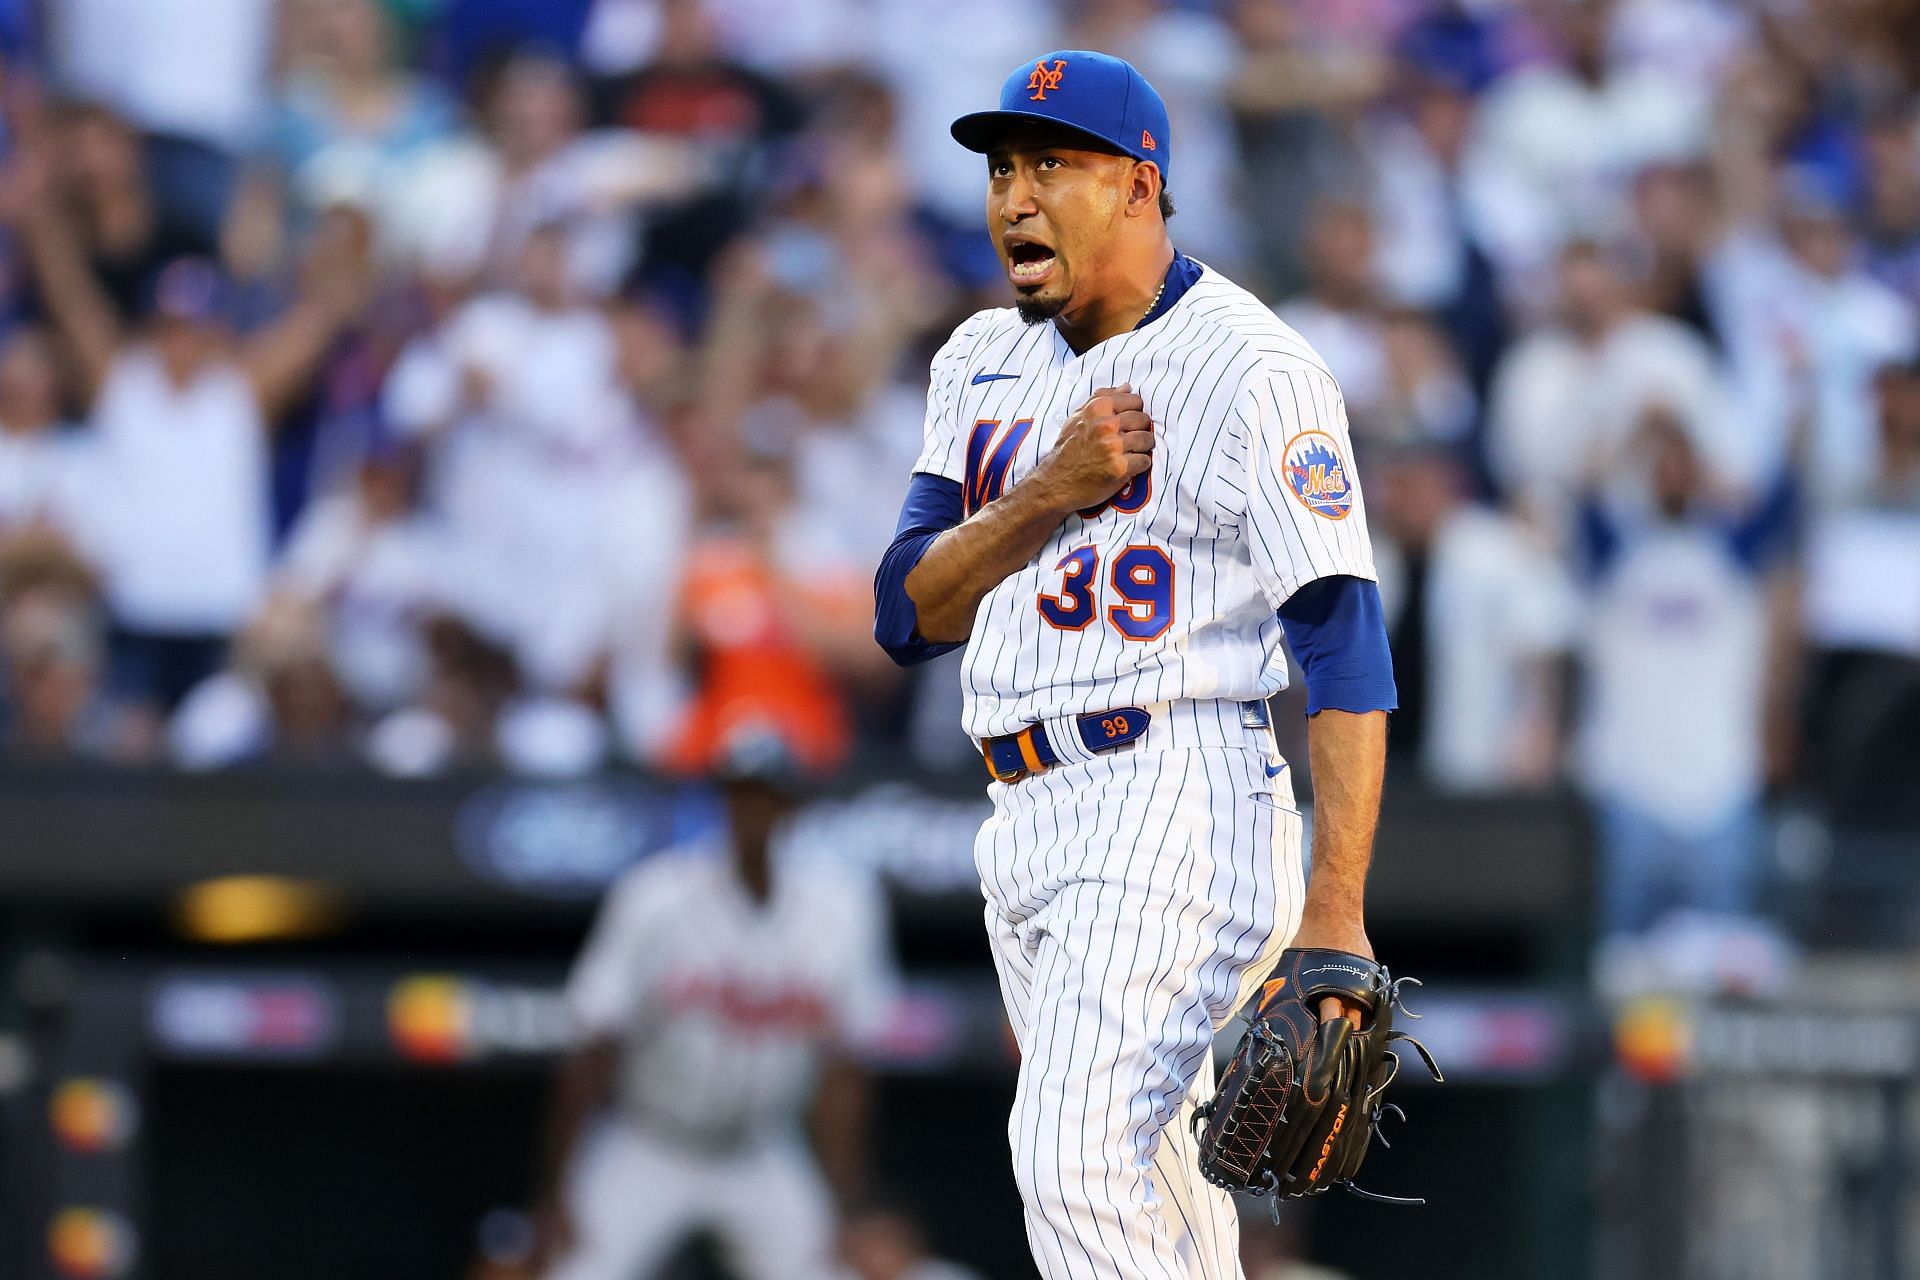 Edwin Diaz of the New York Mets celebrates after defeating the Atlanta Braves 5-2 at Citi Field